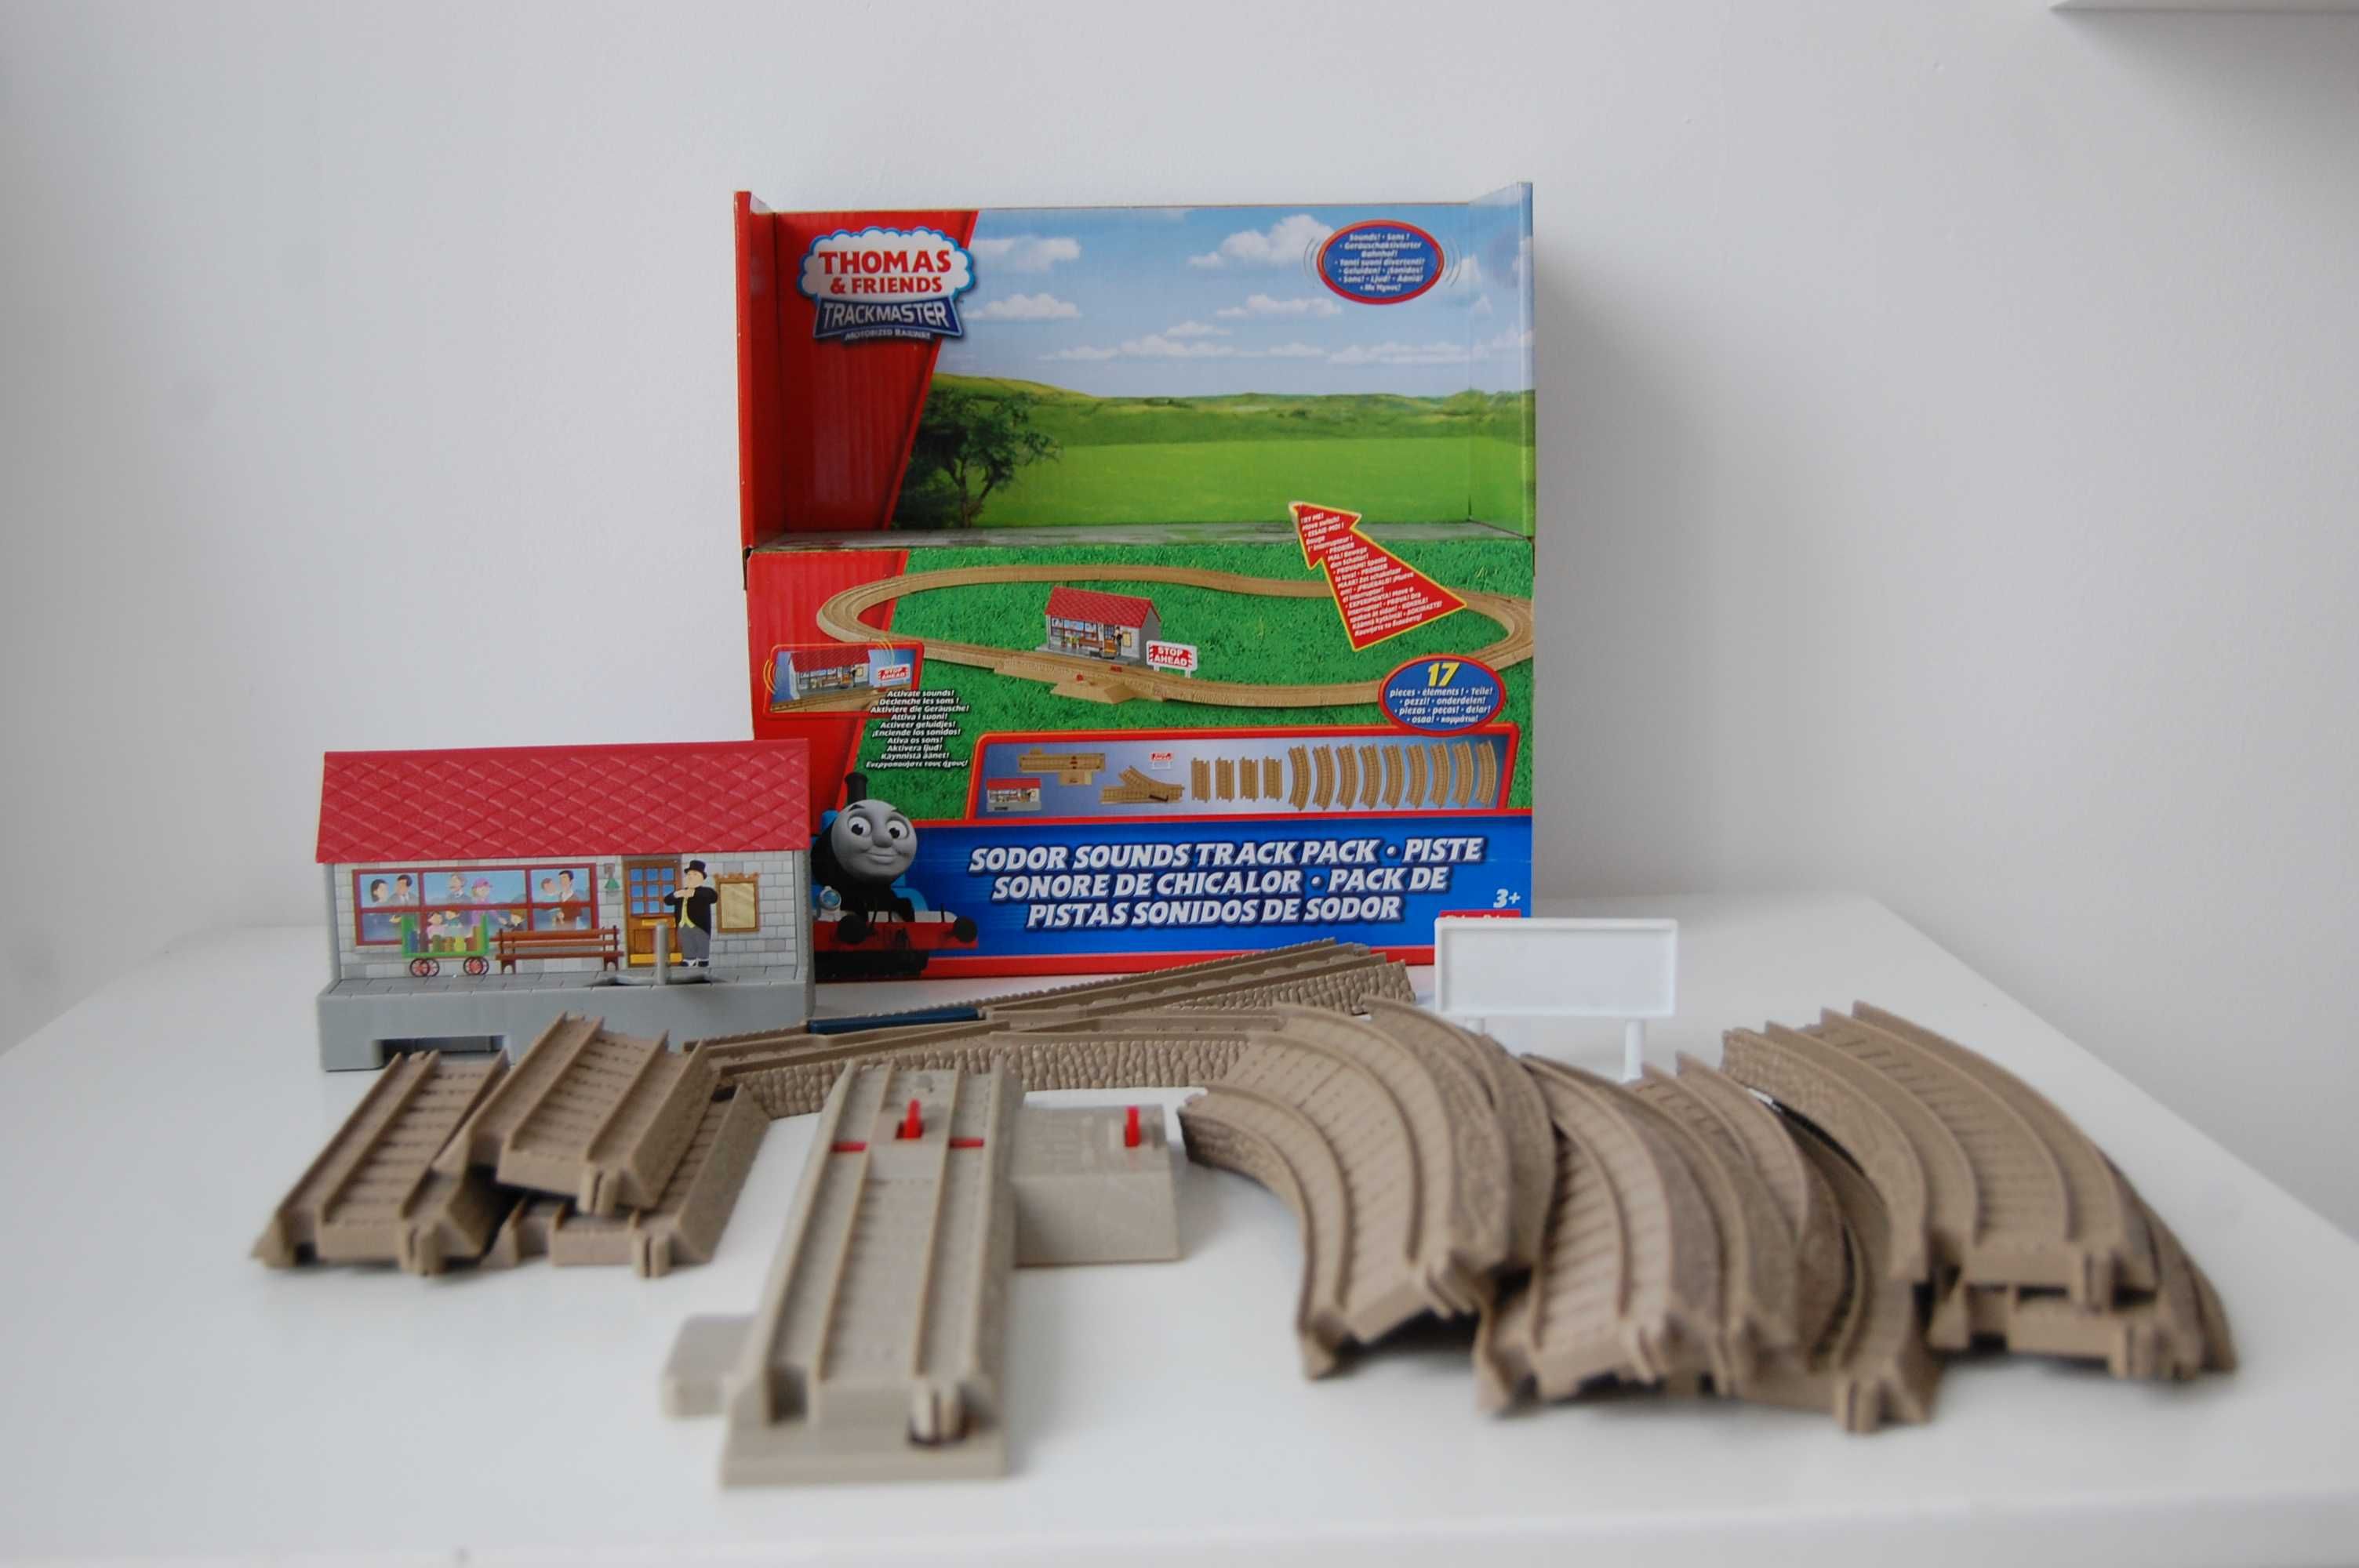 Sodor Sounds Track Pack TrackMaster Thomas & Friends Mattel Fisher